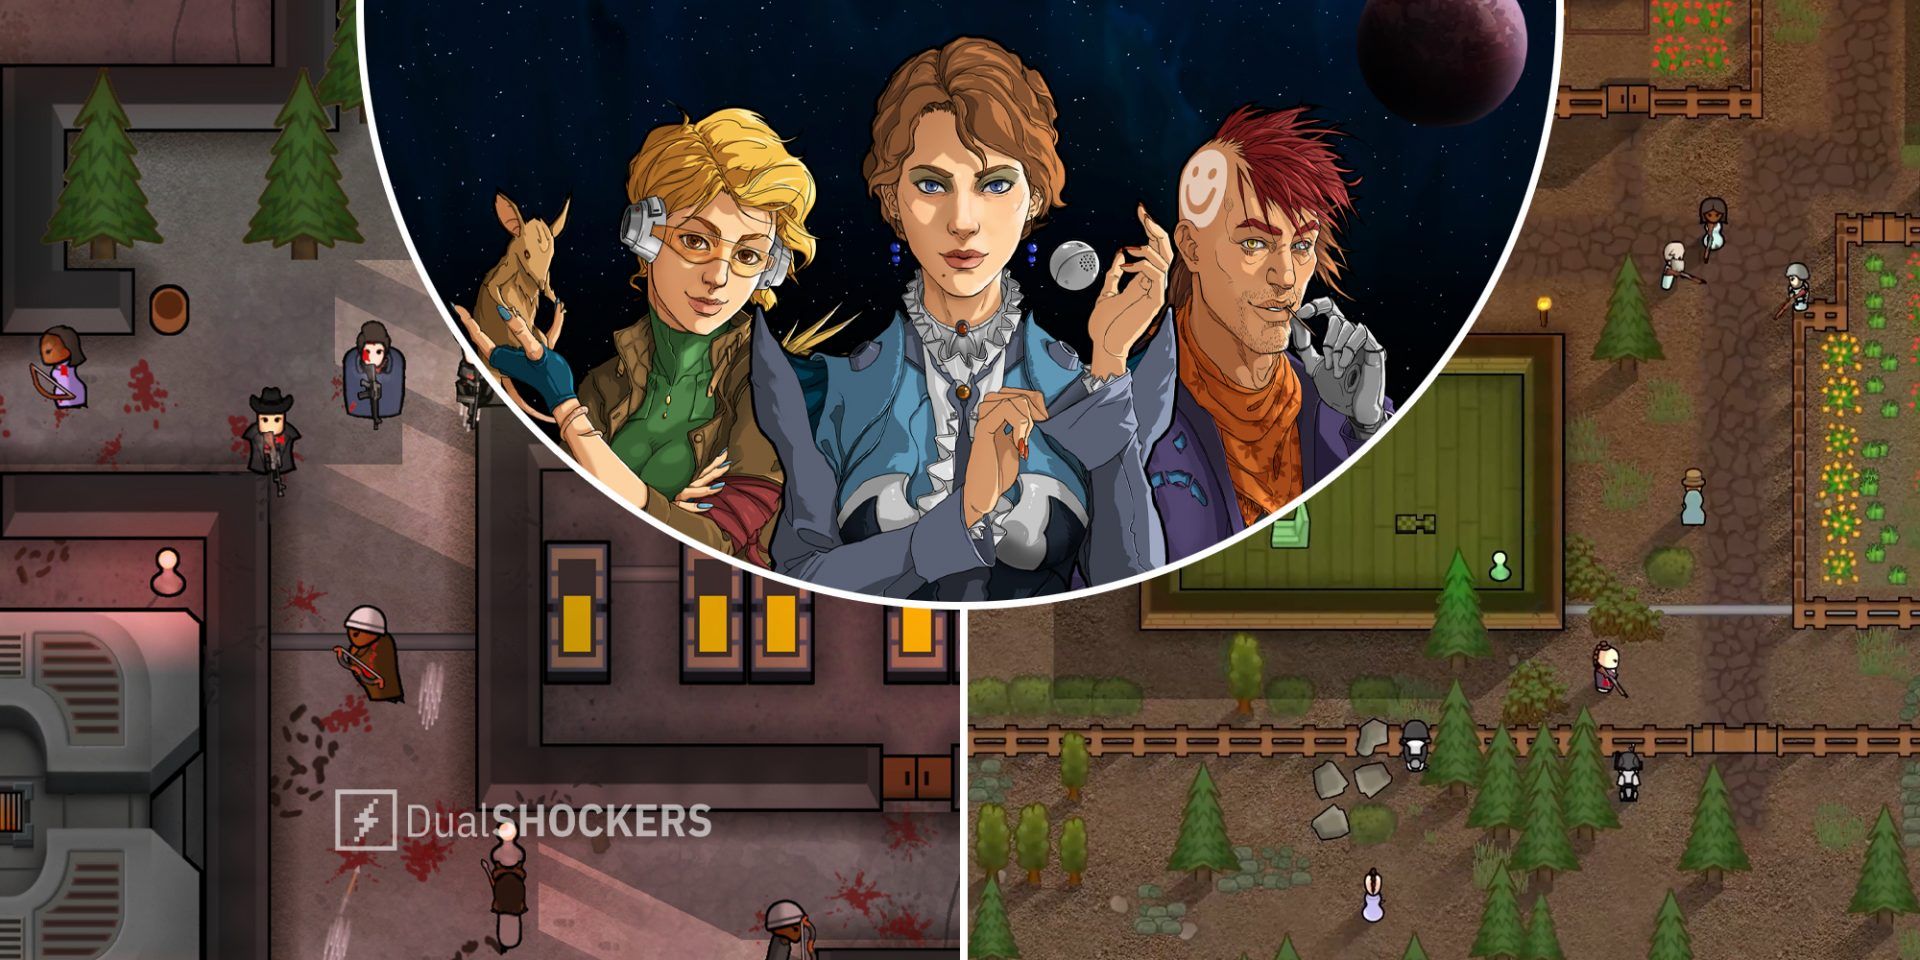 Rimworld screenshot on left and right, Rimworld characters in promo image in middle